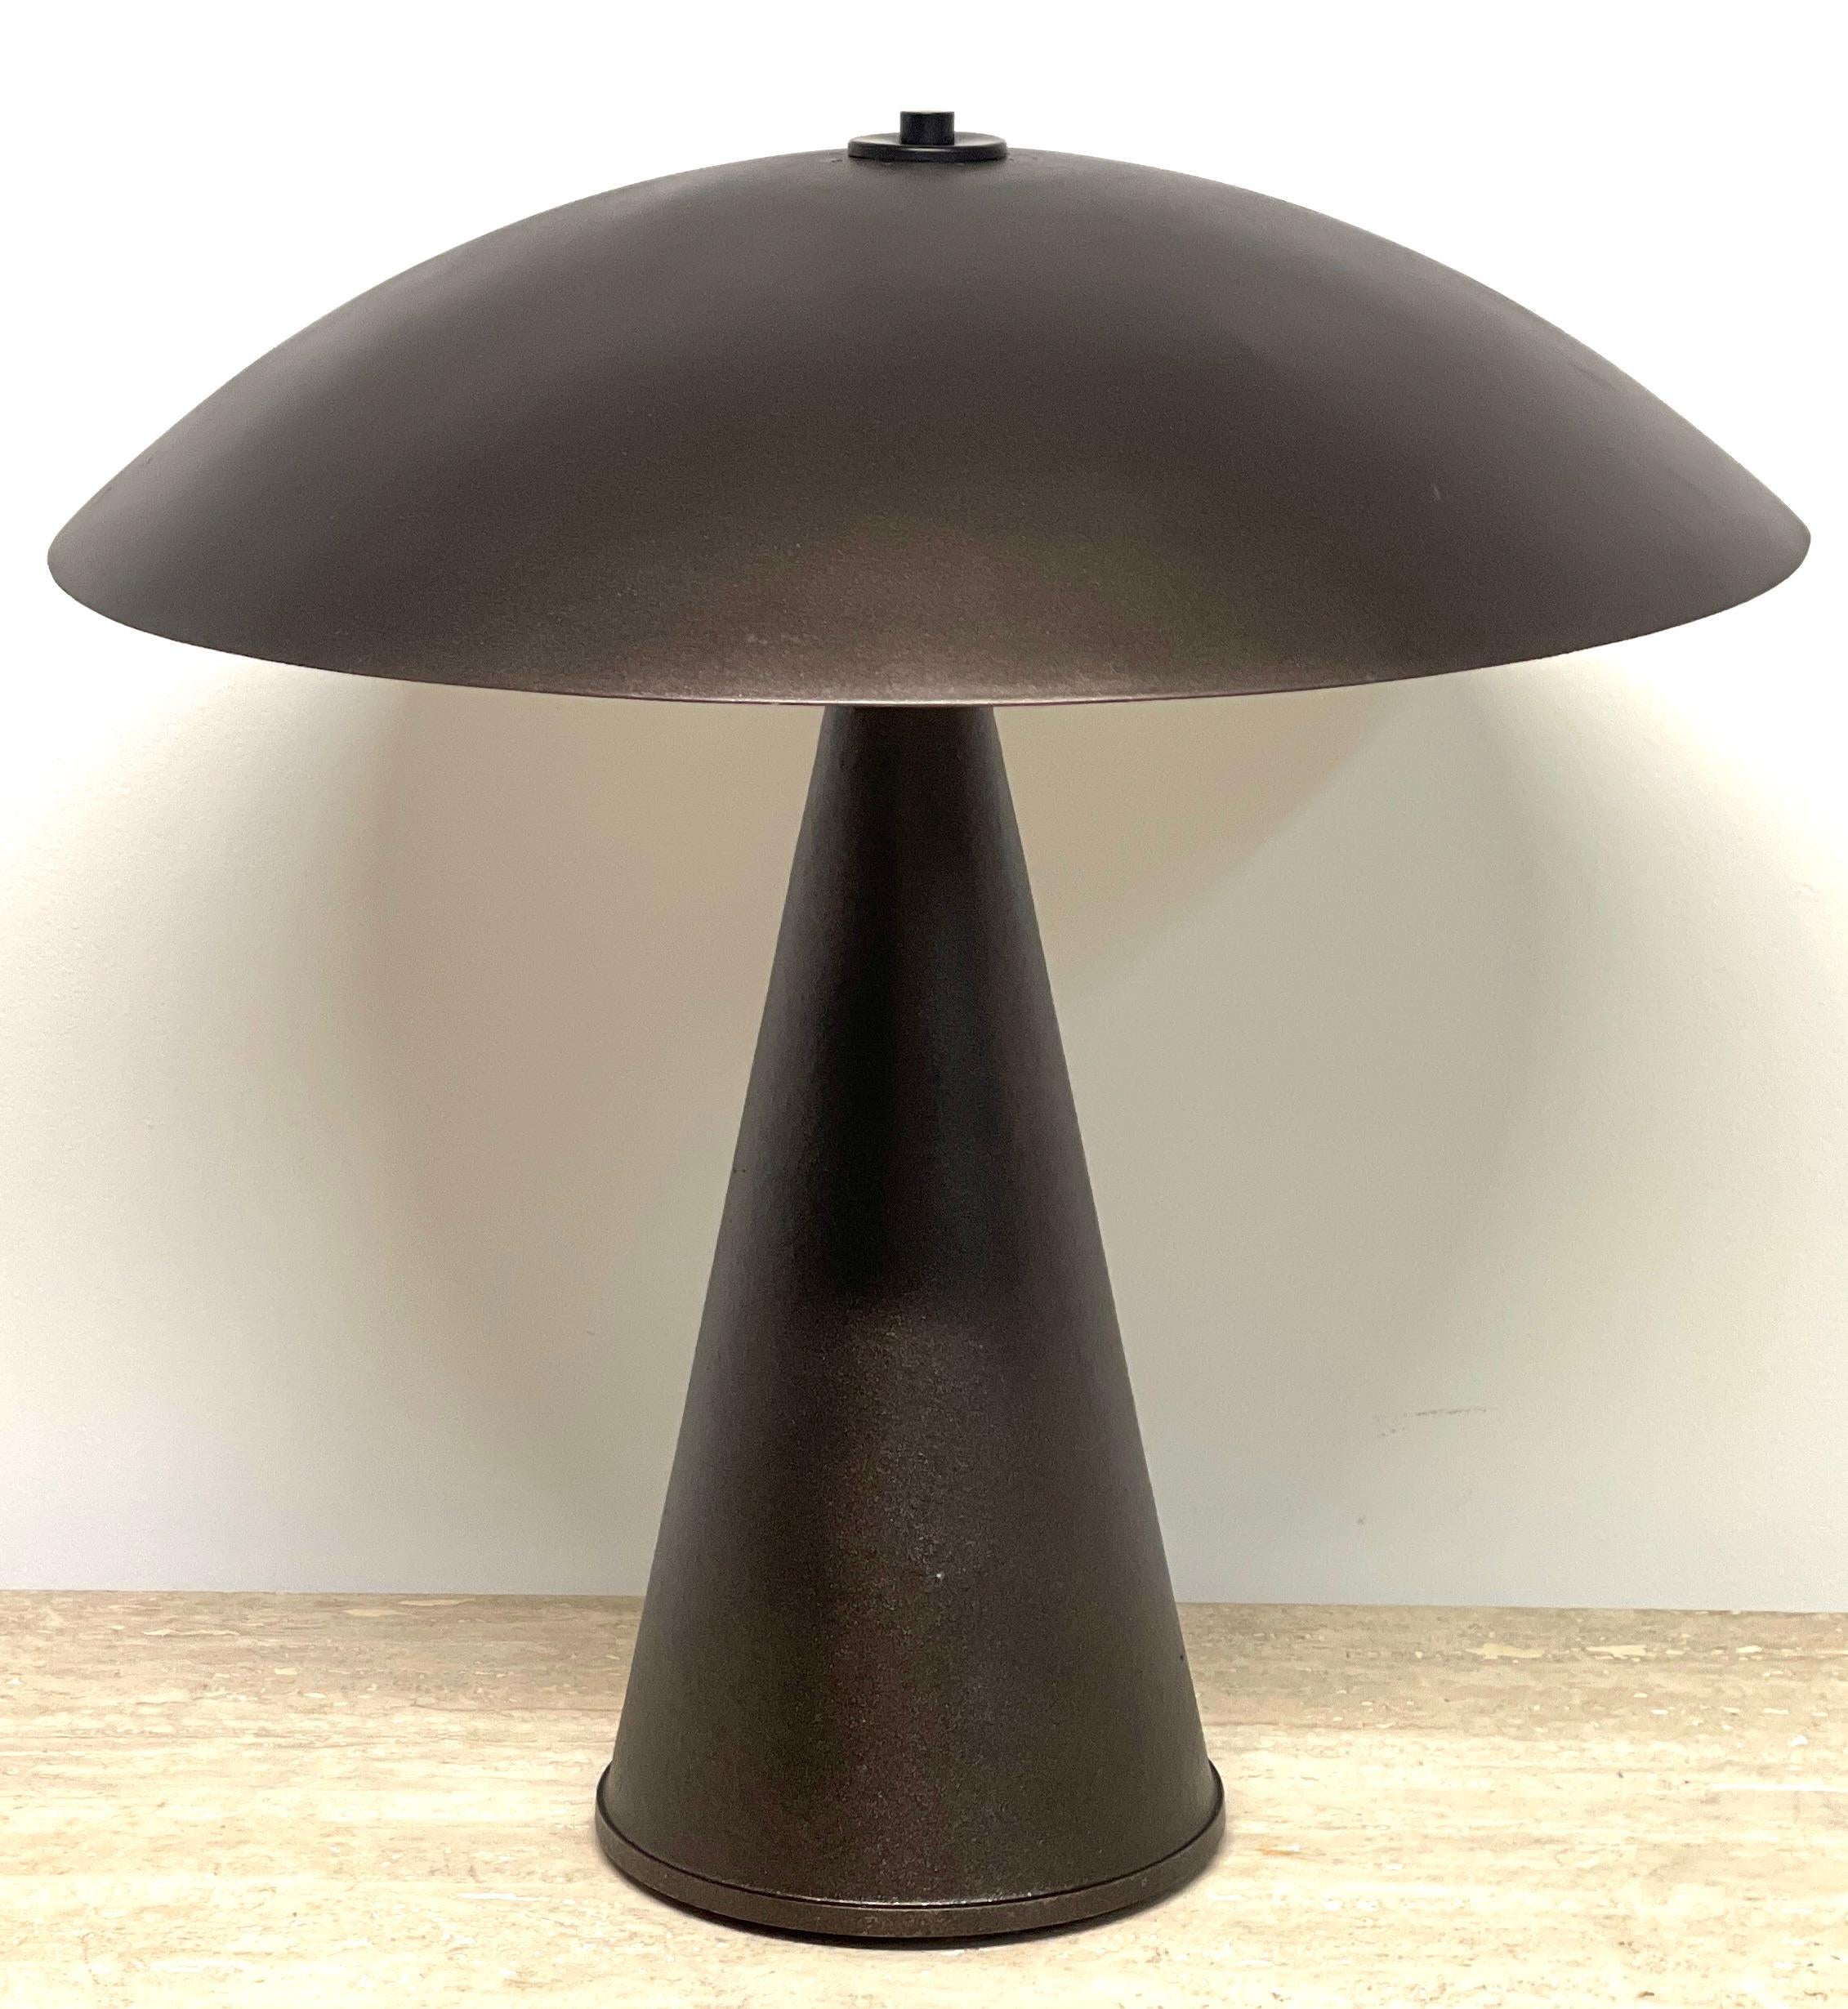 French Post Modern Bronzed 'Mushroom' Lamp, circa 1980s
European, wired for the US
Of good size, and proportions, fitted with two standard bulbs, the domed 'Mushroom' shade, with white enameled interior. Raised on a tapering 7-Inch diameter pedestal